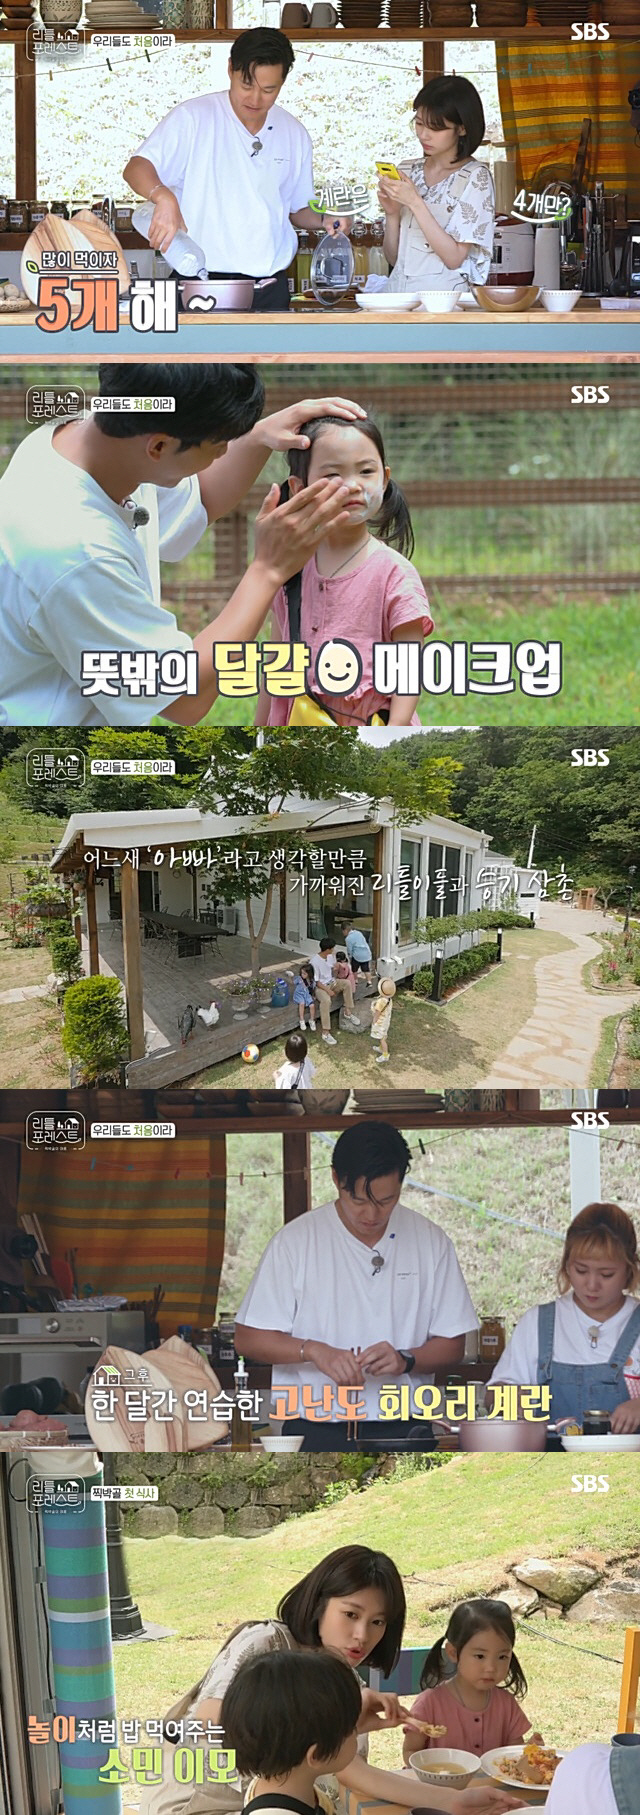 Little Forest Park Na-rae, Lee Seung-gi Gi, Lee Seo Jin and Jung So Min were embarrassed by full-scale real-life childcare.In the SBS entertainment program Little Forest broadcasted on the 13th, the first day of the four carers was drawn. The main chef Lee Seo-jin started lunch for the children.Lee Seo-jin became a dajini by chopping vegetables for children, and showed a delicate appearance of taking children during cooking.While lunch was being prepared, Lee Seung-gi-ki and Park Na-rae took the children to the animal farm, and unlike the excited children, Park Na-rae, who had chicken phobia, was afraid and did not know what to do.Lee Seung-gi-gi said, How do I care for all five people? He worried, but he made it possible for children to touch eggs, show rabbits, and get close to children.Choi dropped the egg, crying, What do I do? And Lee became restless and icy. Also, while Lee was breathing for a while, chickens and rabbits came out.Lee Hyun-yi shot a long wind to a rabbit and Lee Han-yi said that he wanted to eat milk. When the situation continued, Park said, I am sorry I can not help.On the other hand, Jung So-min, who helped Lee Seo-jin to cook, showed no confidence in cooking unlike the aspect of parenting.Lee Seo-jin pointed out, You are just ignorant. Jung So-min, who was trying to make egg soup, made egg steamed.Lee Seo-jin looked at the farm where the children were playing and handed out the sunblock to the children by looking for Park Na-rae with a loudspeaker.While Park went a long way to the hostel, Little Lee had an accident that he was spilling chickens on the rabbit.Lee Seung-gi-gi found a broomstick and a dustpan, and Park Na-rae went up and down again and breathed out a breath. Lee Seung-gi-gi applied a sunblock to Littles, but it was unintentionally made up eggs.The white kids faces eventually became Park Na-rae, and they applied a block to them. They struggled to clean up the animal farm.Lee Seo-jin decided to make an omraise for children, but Lee Han-yi said, I hate omraise.Park said, It may be different from the omelet that I have eaten so far. If Lee Han eats it and does not taste it, lets not eat it.Lee Seo-jin showed a whirlwind omerice that he practiced for a month, and Lee Seo-jins handmade ketchup caught the childrens appetite in the whirlwind omerice that he completed at once.Lee Seo-jin smiled at the childrens delicious eating, and Lee Seung-gi-gi and Jung So-min, who were hungry while feeding Littles rice, ate the food that the children dropped.Kang Yi-han, who ate three milk before eating rice, said, I am full. I did not eat much rice and spilled soup on my clothes.Lee Seung-gi-gi changed his clothes and solved the bathroom and spent an unpredictable lunch time.When the Littles finished their meals, the adults ate the leftovers. Lee Seung-gi-gi took turns sitting at the table with Park Na-rae, who had eaten in a hurry.Meanwhile, Brooke and Grace wanted Chikachika, and Lee Seo-jin, who had a forced meal, took the twins and brushed them directly at eye level.Jung So-min said, I do not know where the rice is going. Lee Seung-gi-gi said, I thought about playing, but I did not think about feeding and wiping.Care is a real different thing - play is short and care is long, he said.Meanwhile, the children fell into a bead toy in one room, and unlike Little, who was in the best condition in the endless repetition of beads, adults were rapidly exhausted.